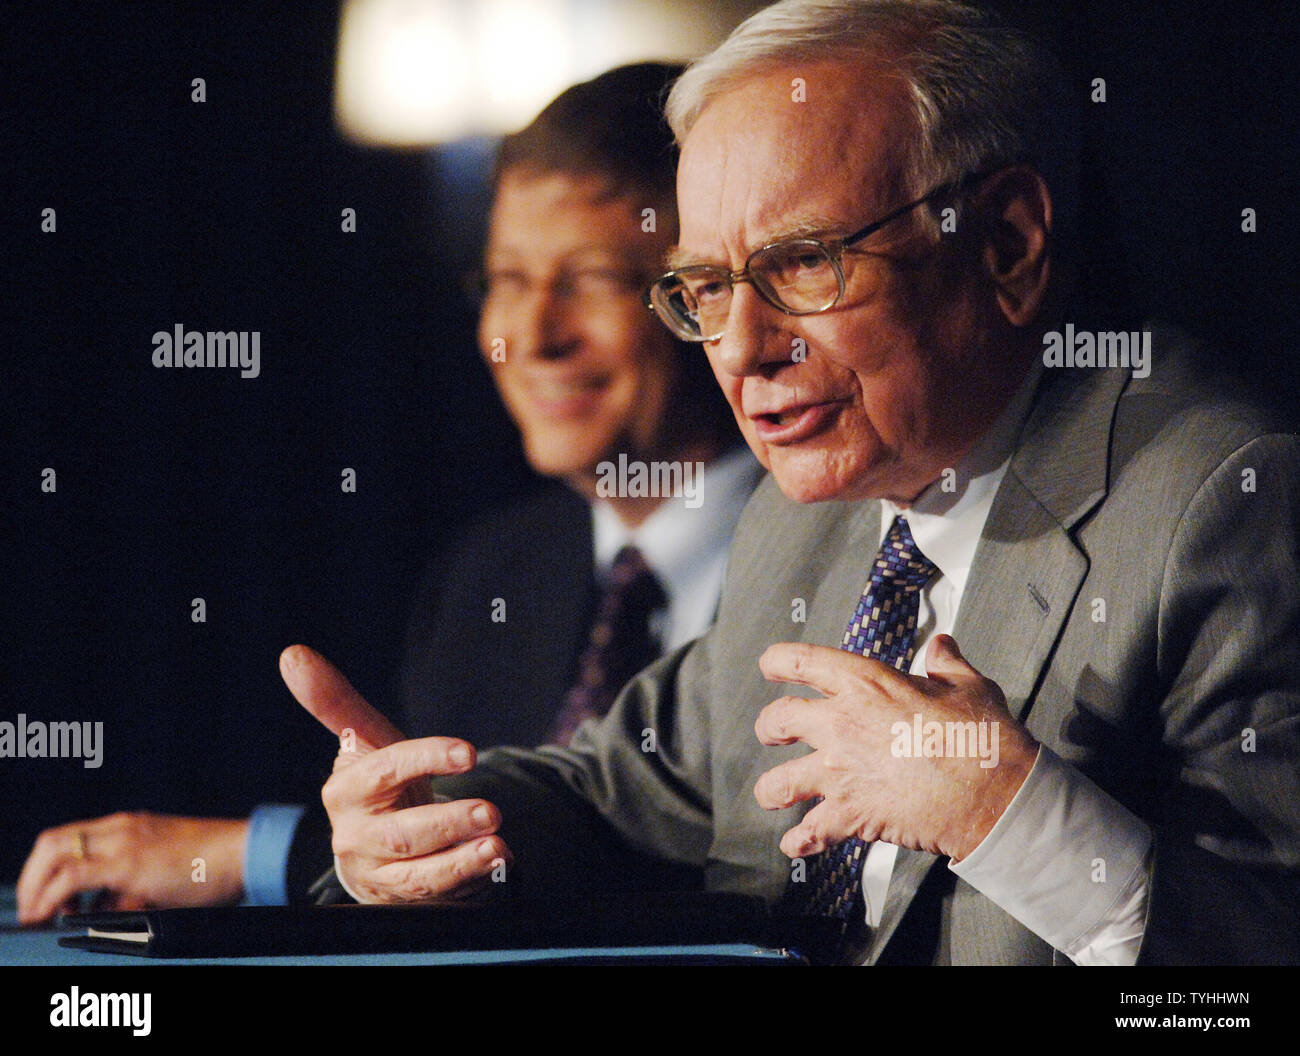 Microsoft Chairman Bill Gates (left)  listens to Warren Buffett, CEO of Berkshire Hathaway Inc. explain to the New York media on June 26, 2006 the reasons for donating $37 billion dollars of his fortune over the next few years to the Bill and Melinda Gates Foundation.   (UPI Photo/Ezio Petersen) Stock Photo